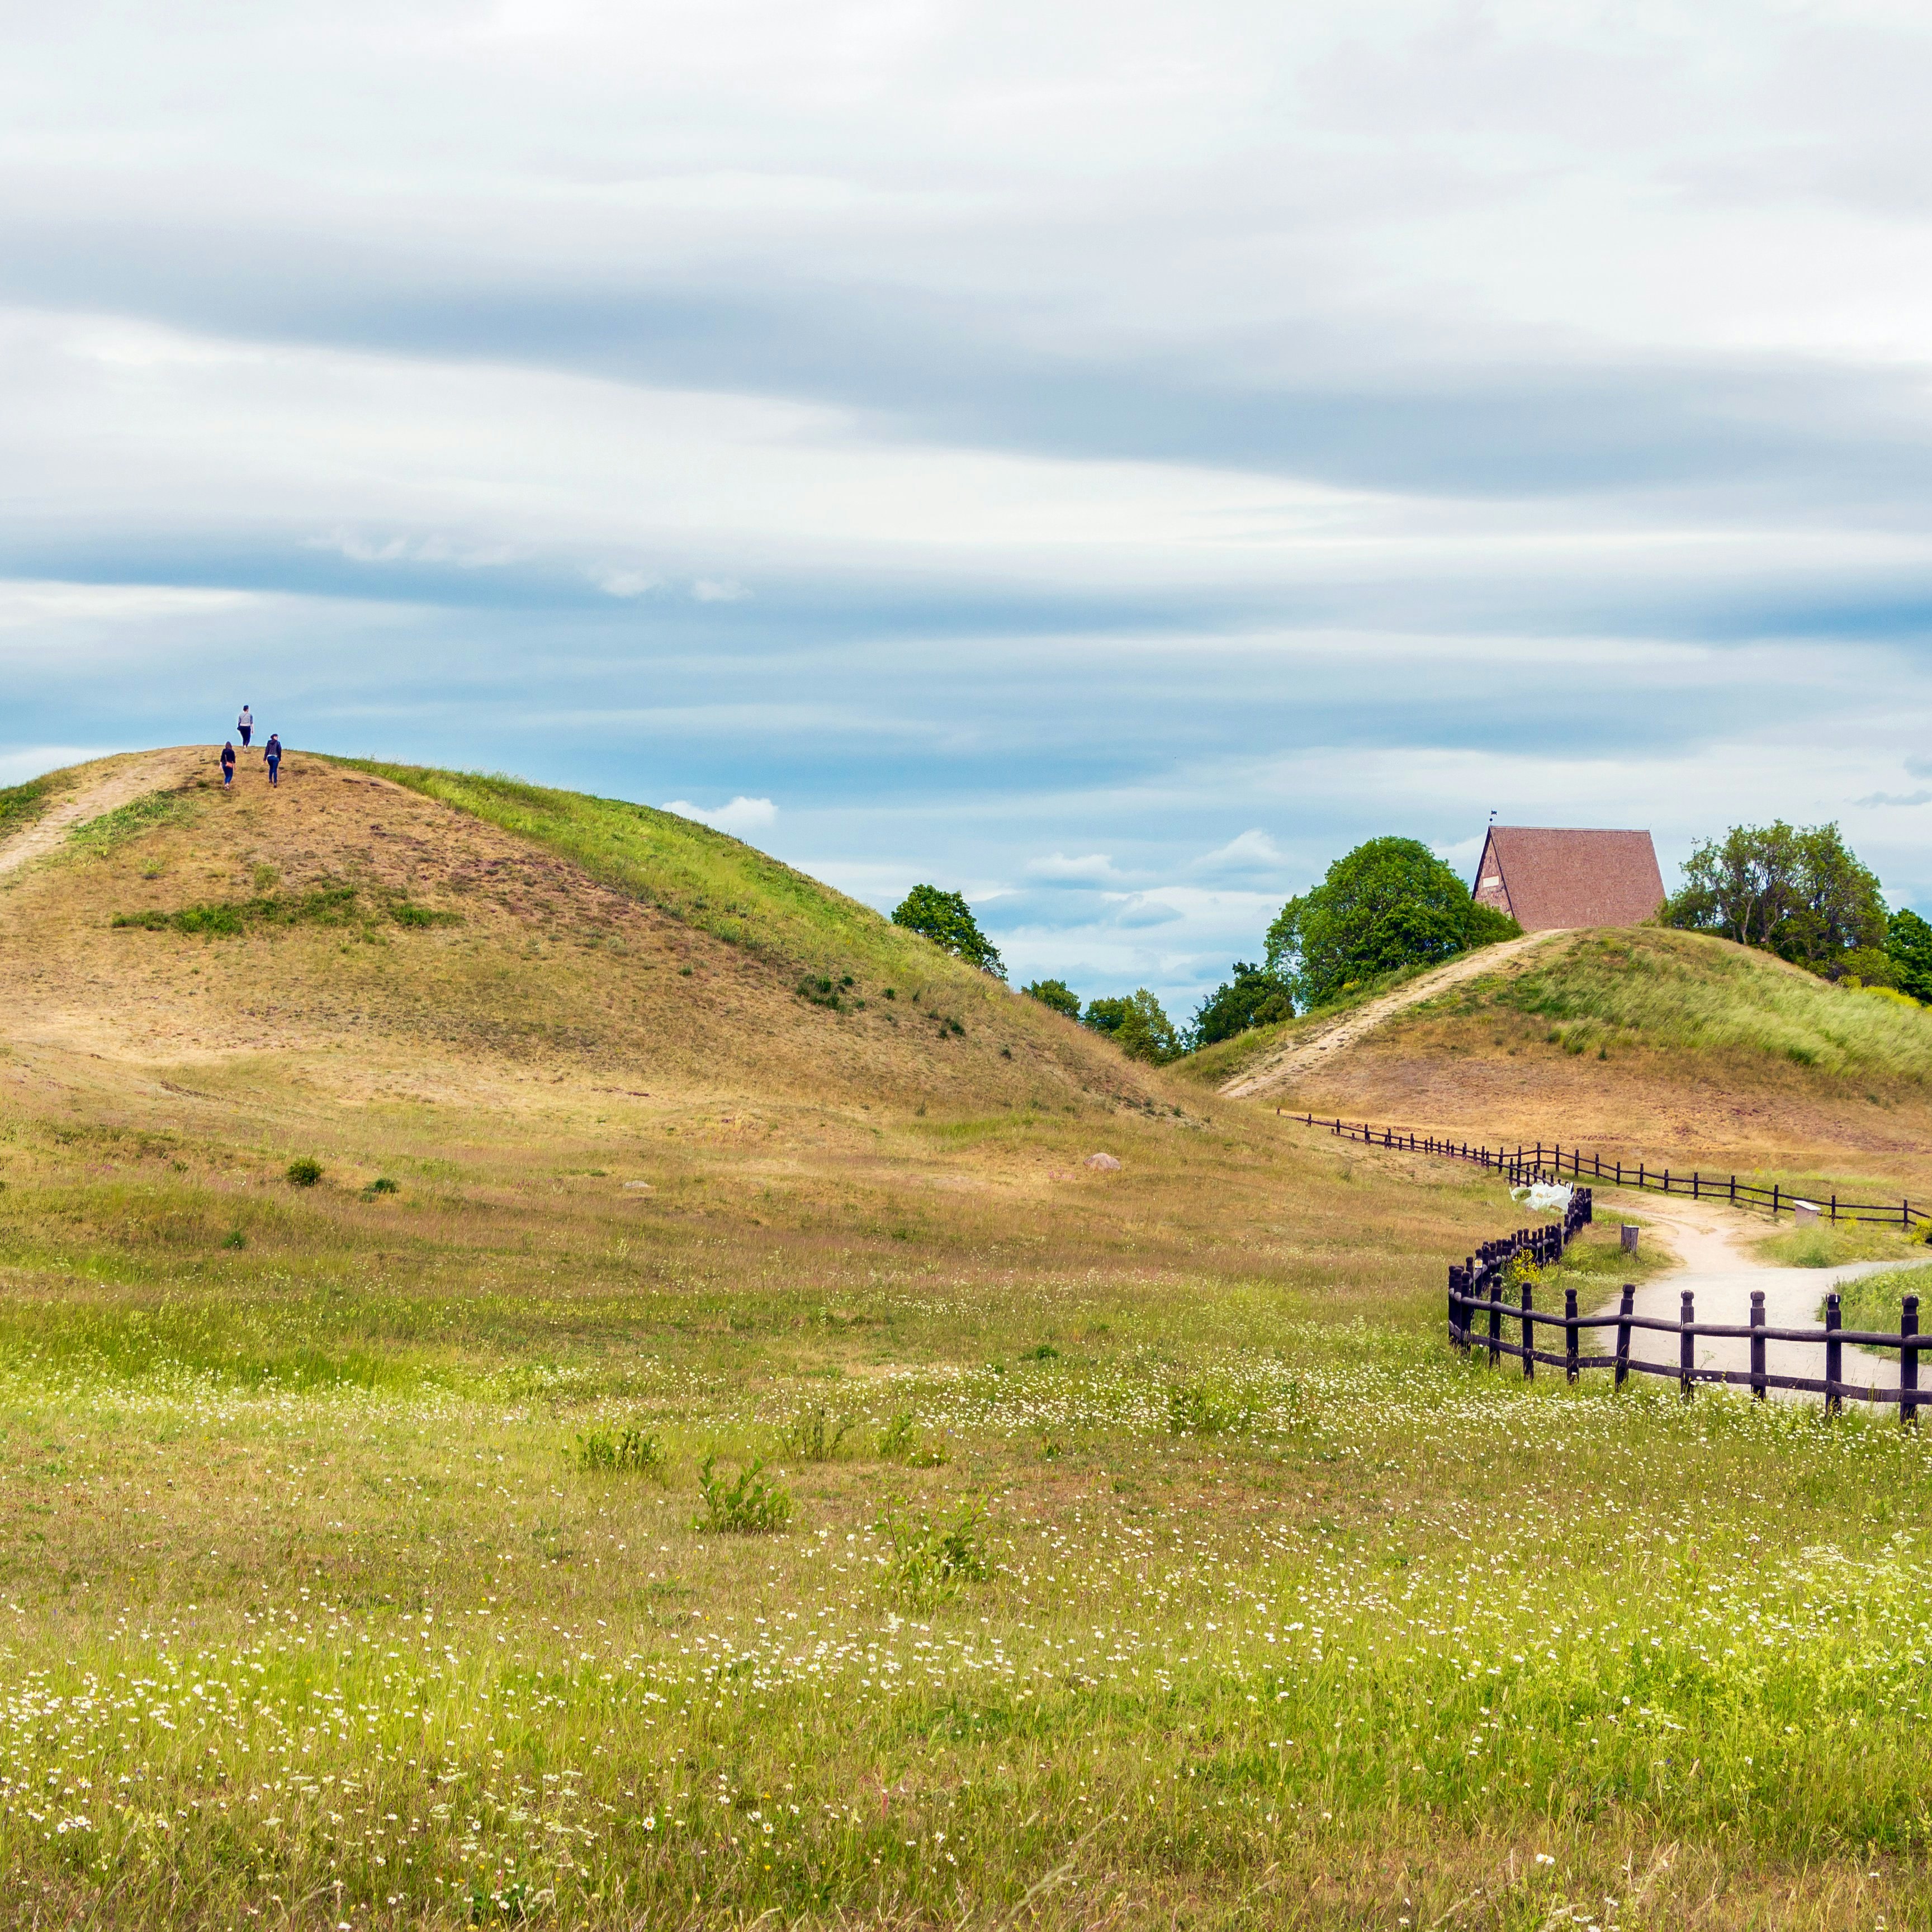 Royal Mounds - large barrows located in Gamla Uppsala village, Uppland, Sweden (70 km from Stockholm).  Beautiful Viking graves covered by grass. Gamla Uppsala is area rich in archaeological remains.; Shutterstock ID 1138429115; your: Bridget Brown; gl: 65050; netsuite: Online Editorial; full: POI Image Update